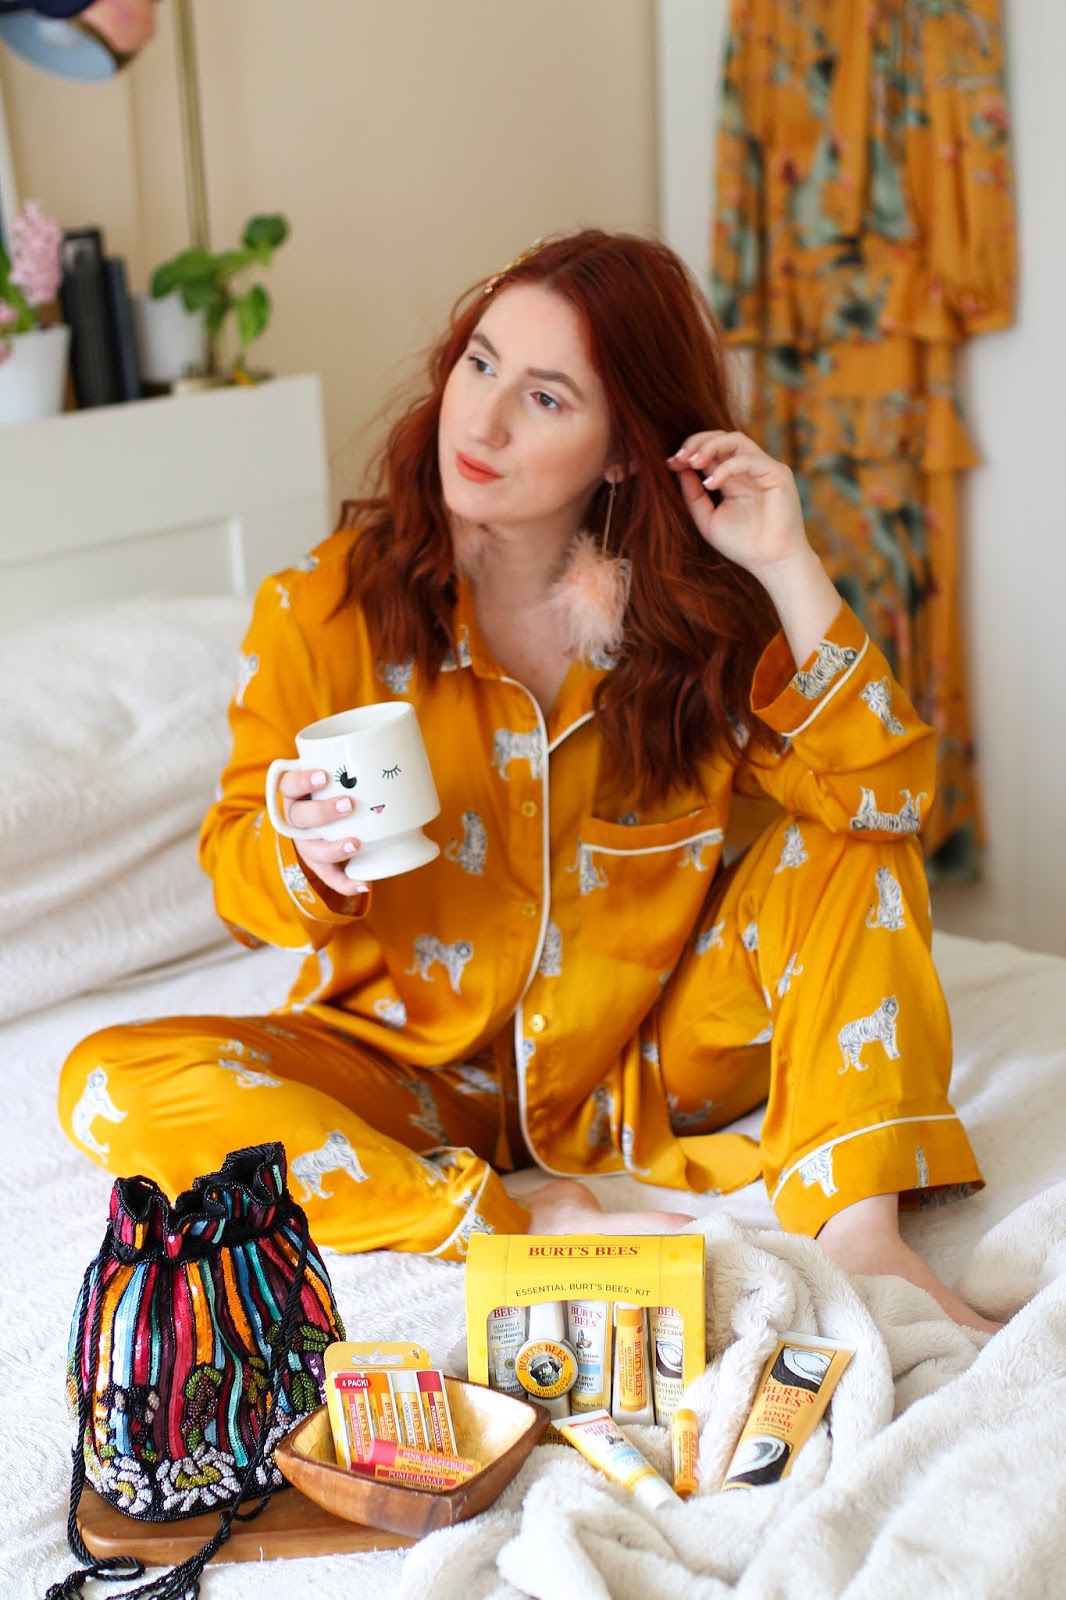 10 Ways To Pamper Yourself At Home, at home pampering, self care at home, mothers day pampering at home, Burt's Bees tfdiaries, Burts bees pampering, mothers day spa day at home